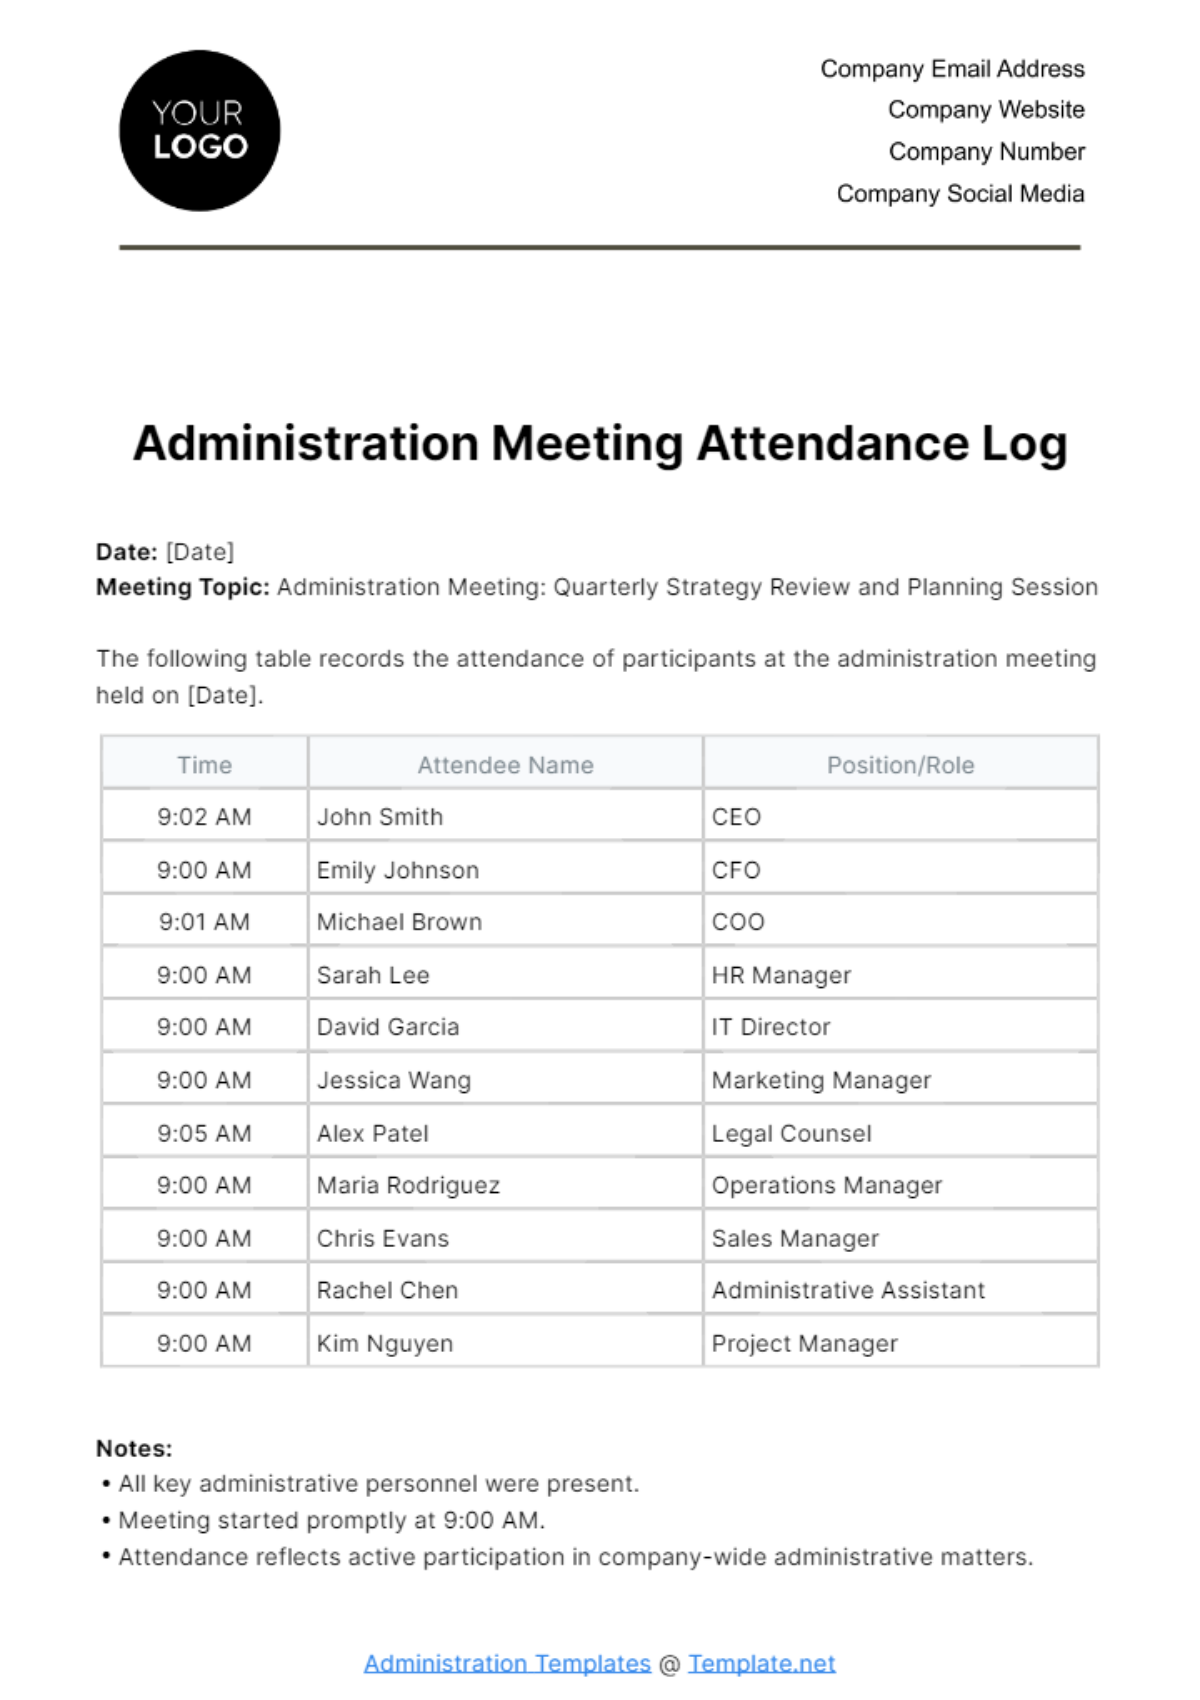 Free Administration Meeting Attendance Log Template